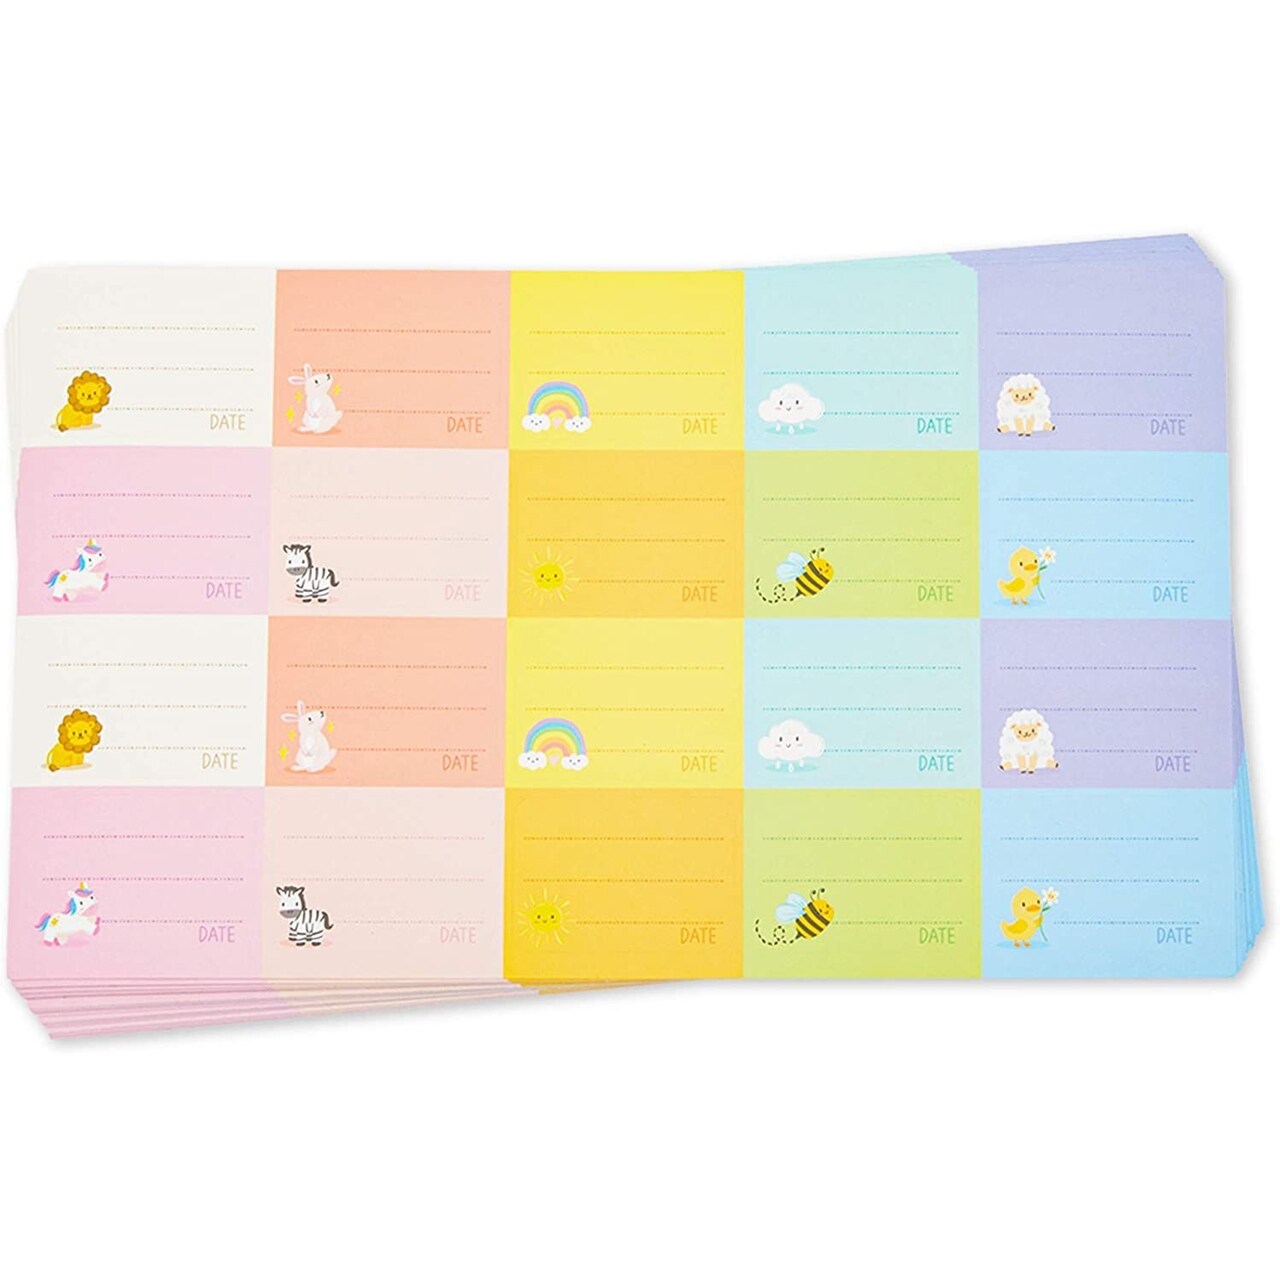 Removable Baby Bottle Labels for Daycare, 25 Sheets (10 Colors, 500 Pieces)